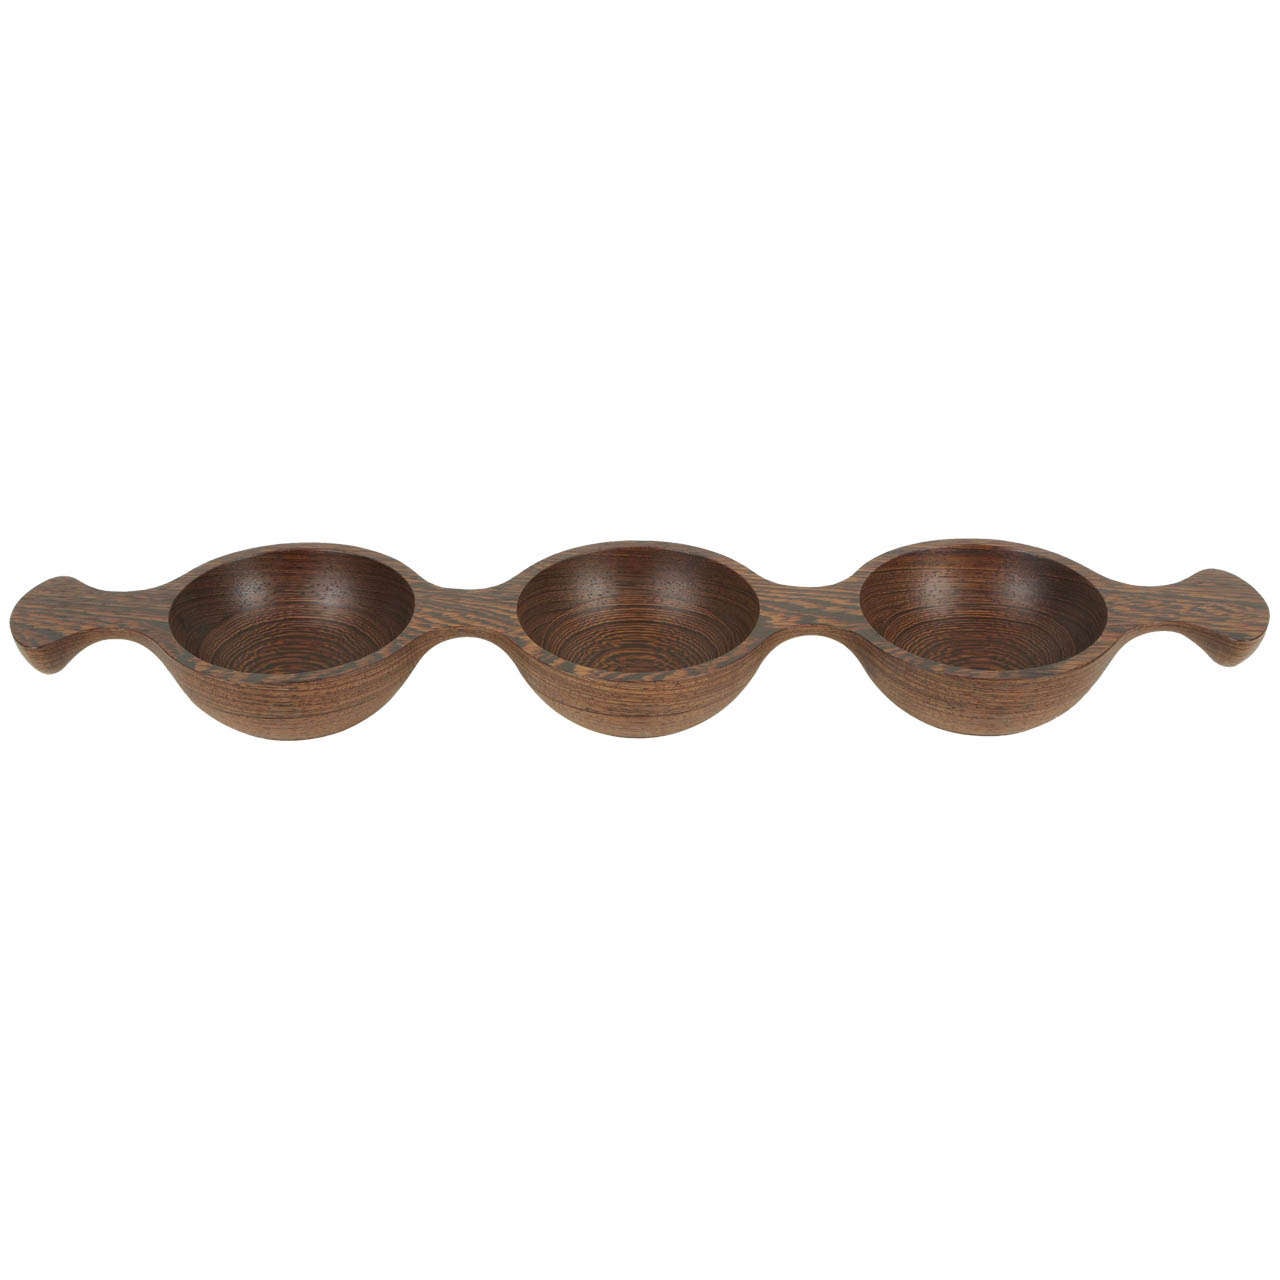 Rare Wenge Triple Hors D'oeuvres Bowl From Denmark For Sale